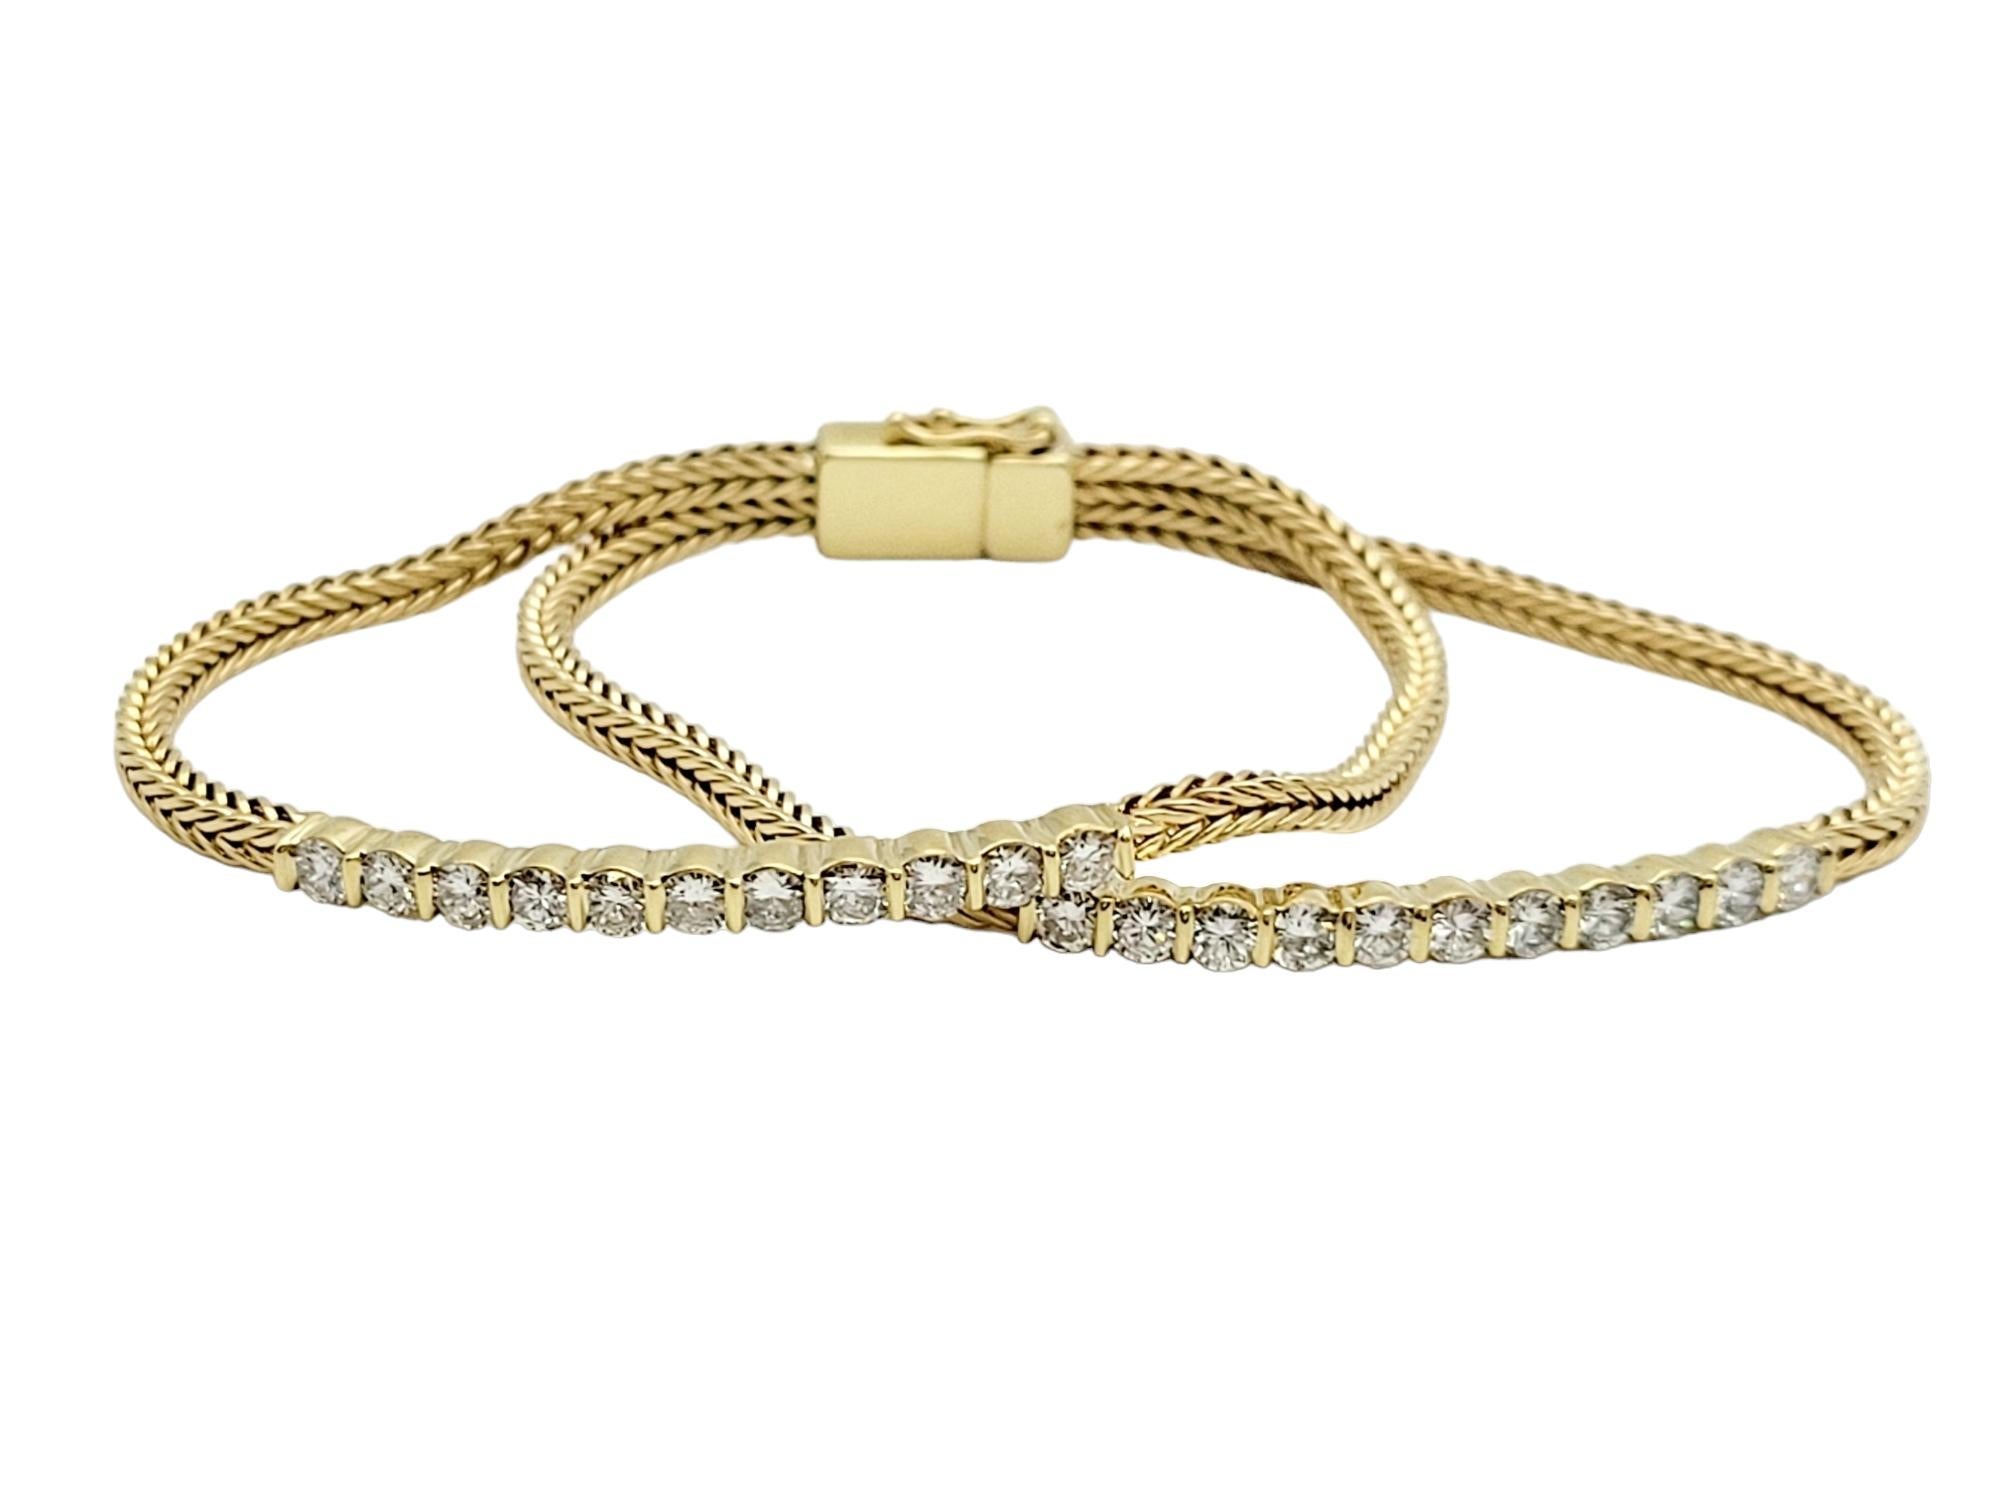 This exquisite diamond and gold bracelet stands as a testament to opulence and refined craftsmanship. Fashioned from lustrous 18 karat gold, the bracelet features a captivating design that effortlessly marries the timeless elegance of diamonds with